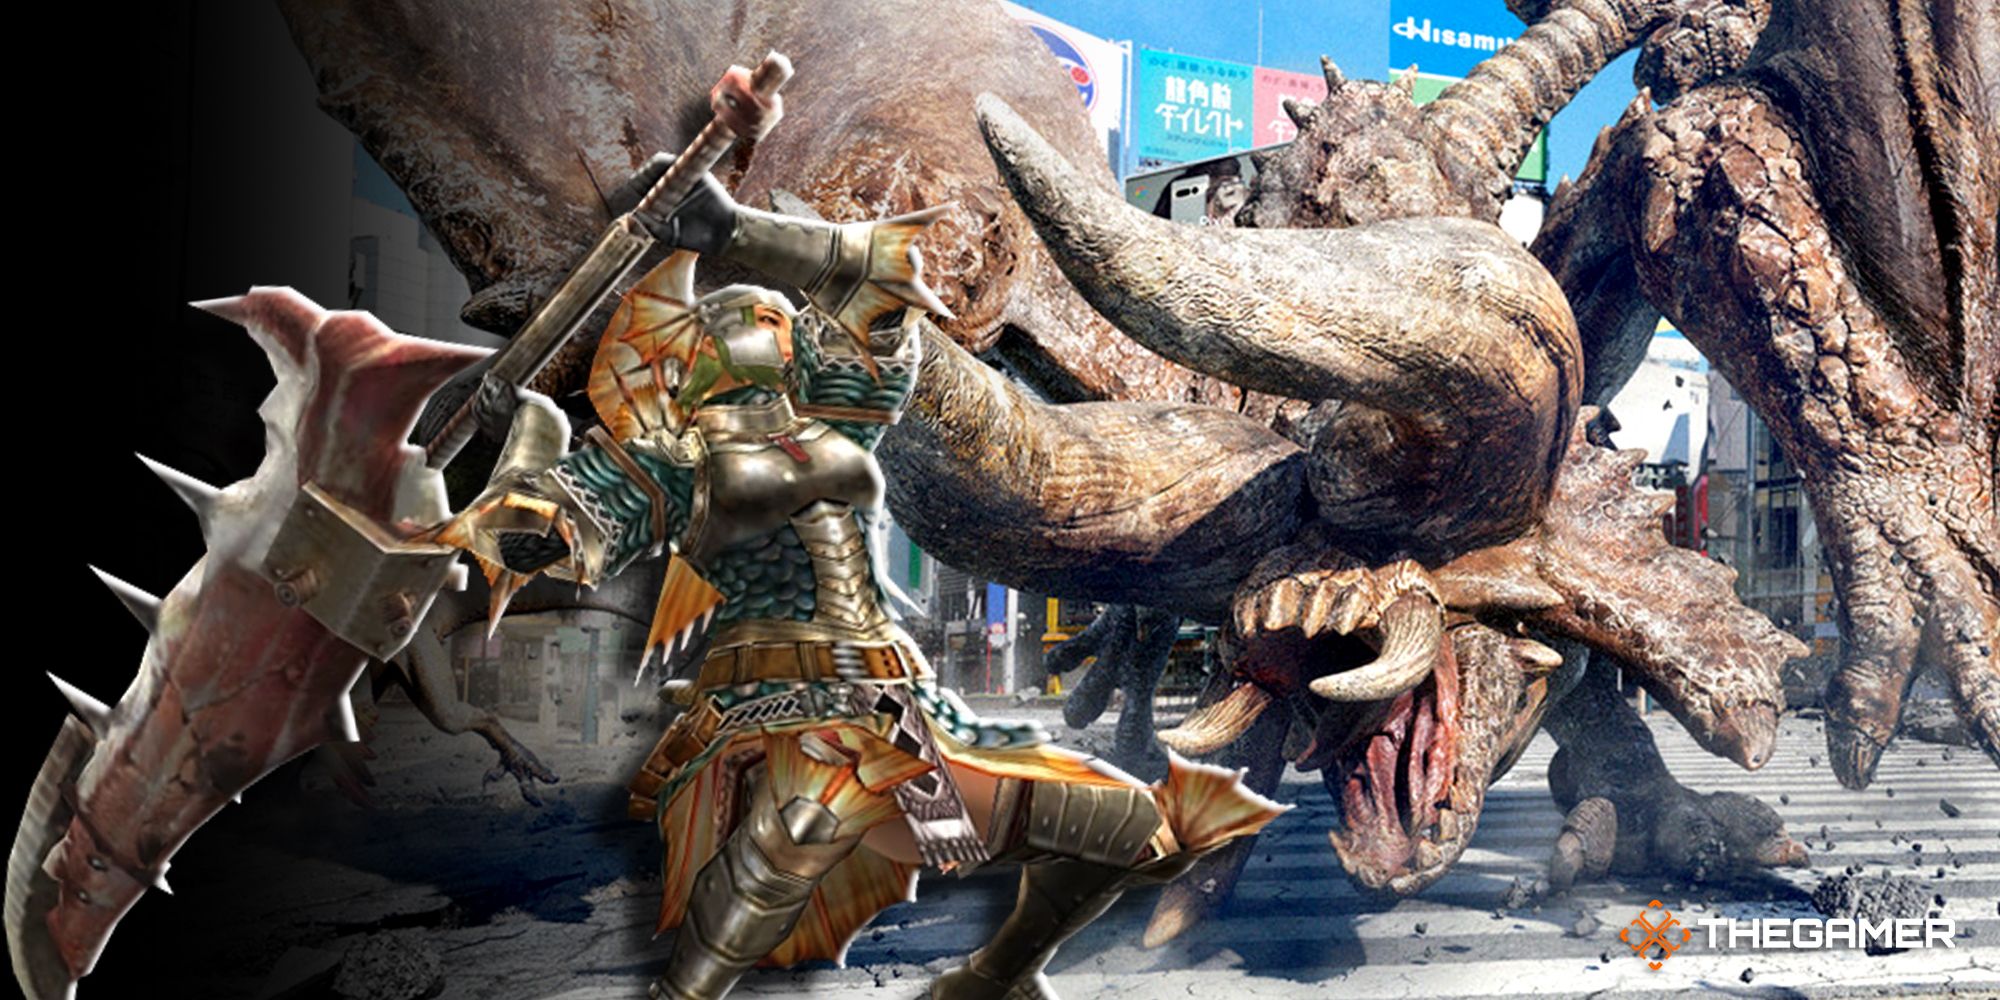 22-Monster Hunter Now community event featuring Diablos